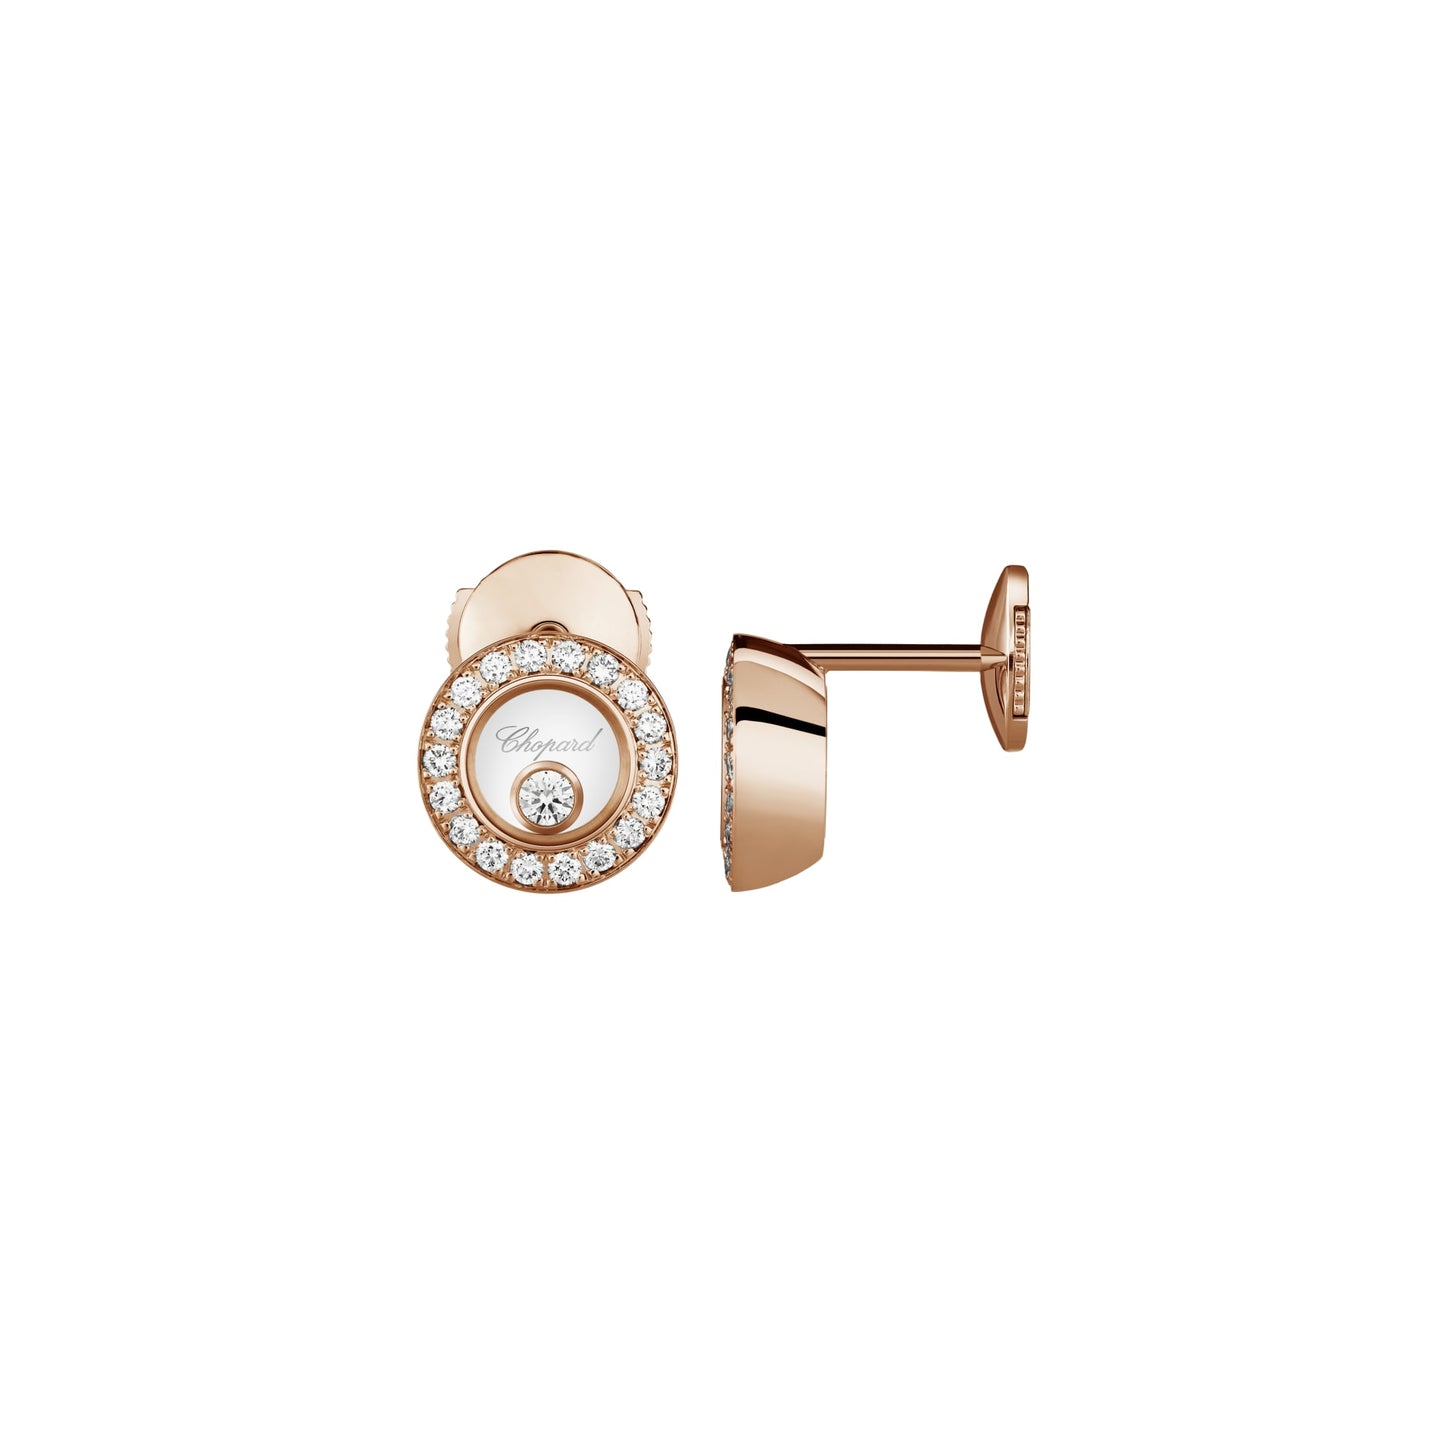 HAPPY DIAMONDS ICONS EARRINGS, ETHICAL ROSE GOLD, DIAMONDS 83A017-5201